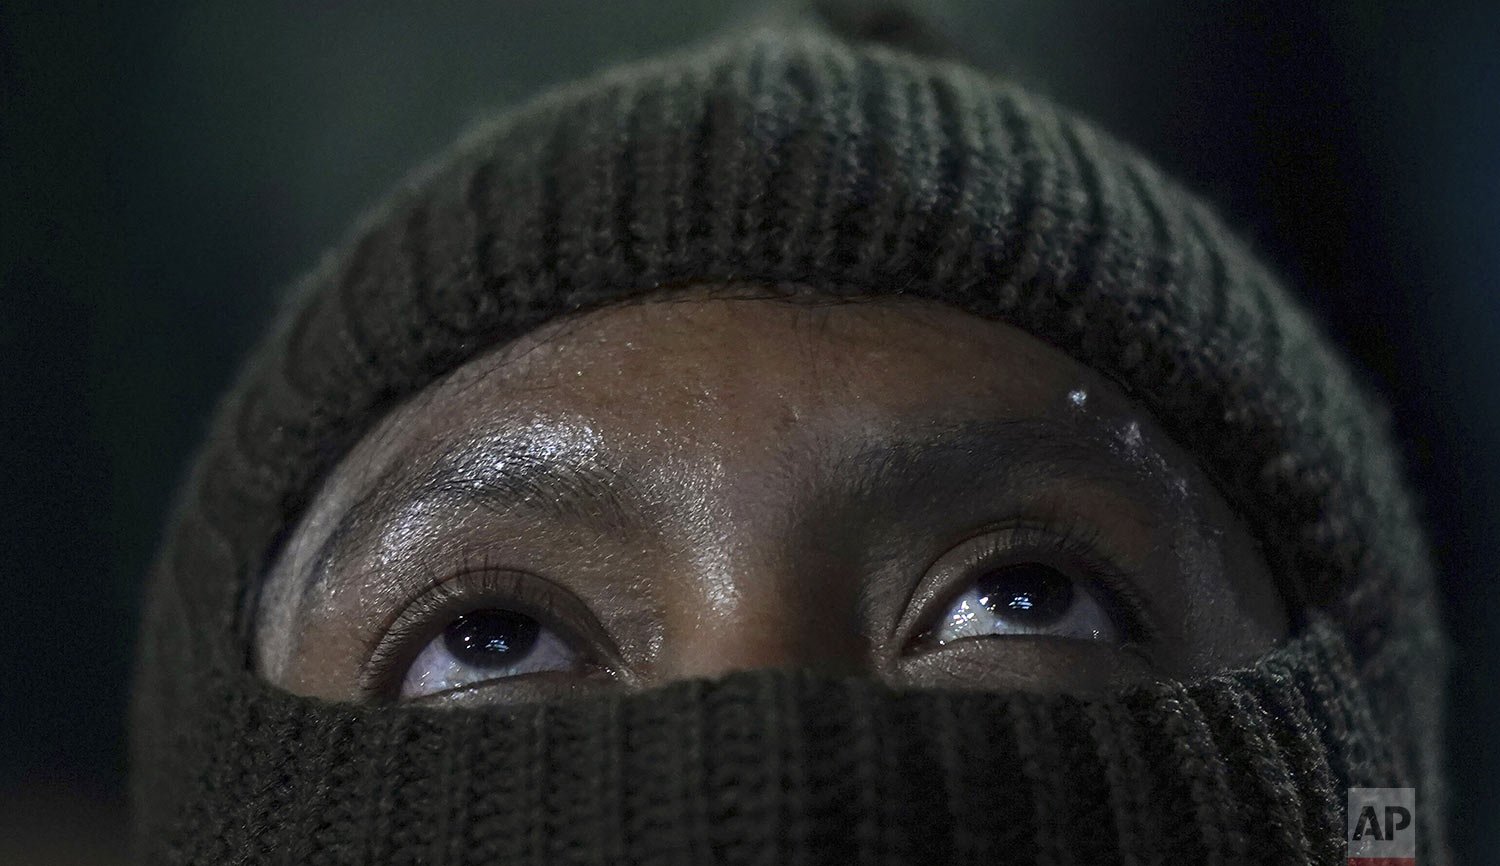  A Honduran migrant who is part of a caravan that is slowly moving north looks up during a protest outside of the National Institute of Migration headquarters in Mexico City, Dec. 14, 2021. The demonstration was to protest the rough treatment they sa